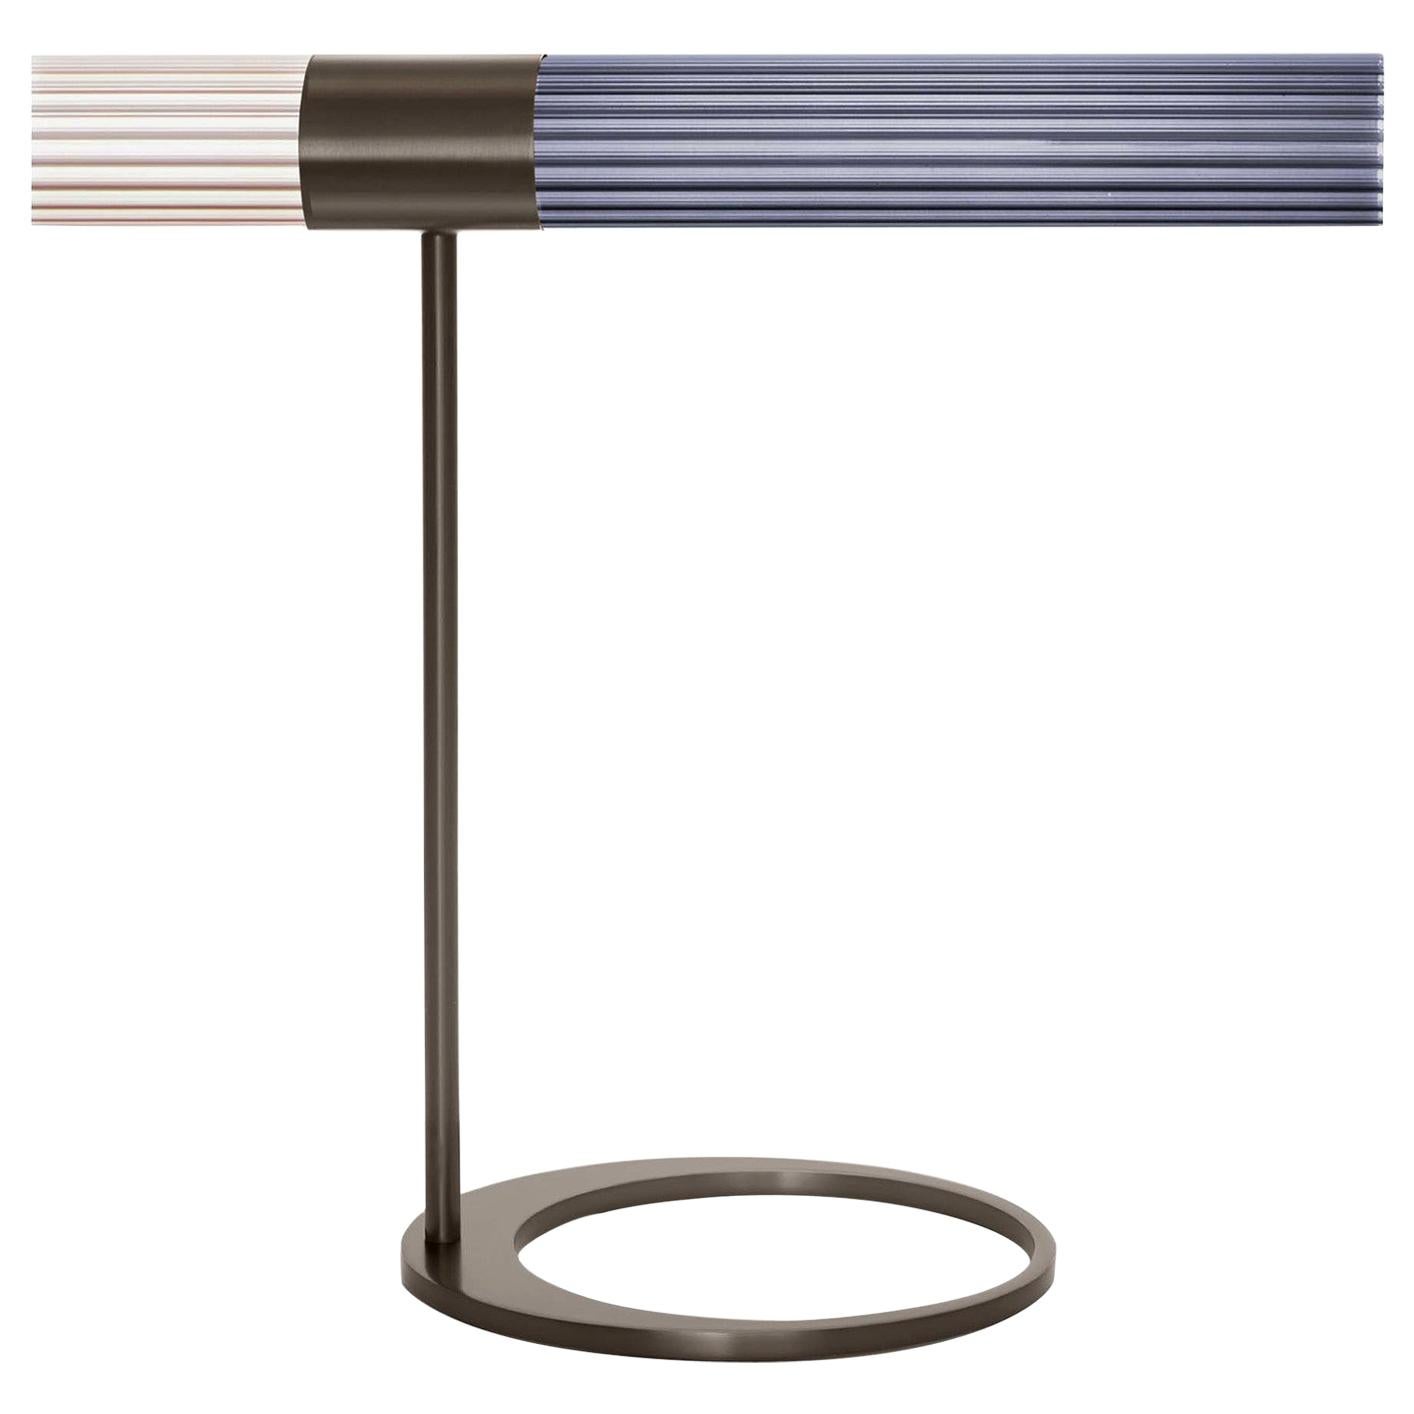 Sbarlusc Blue and White Table Lamp by Isacco Brioschi For Sale